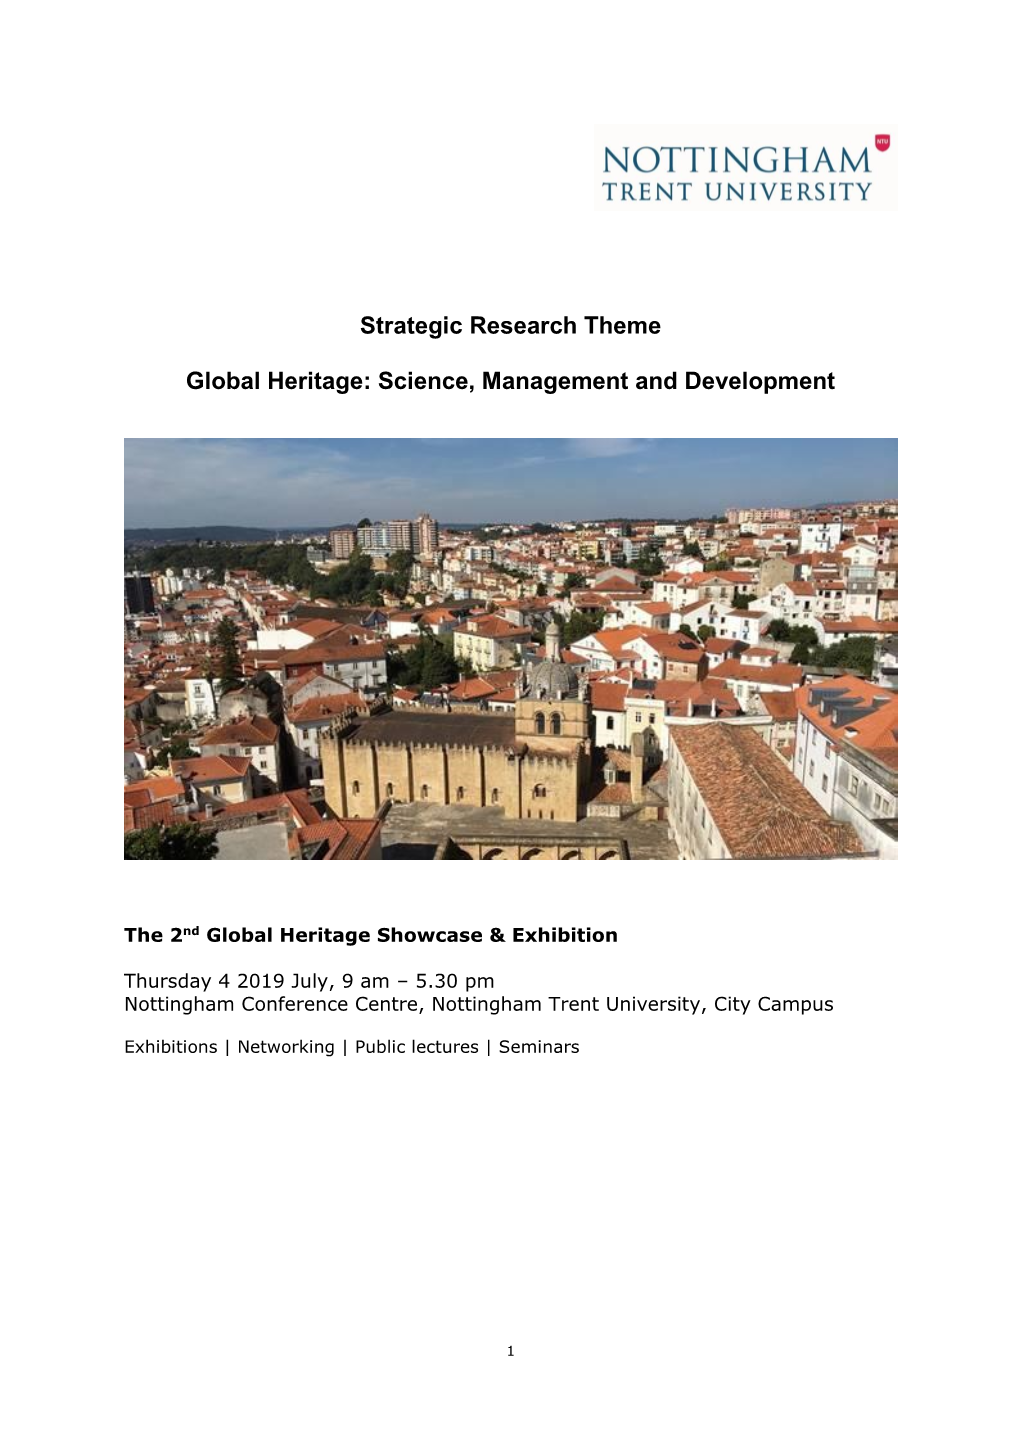 Strategic Research Theme Global Heritage: Science, Management and Development